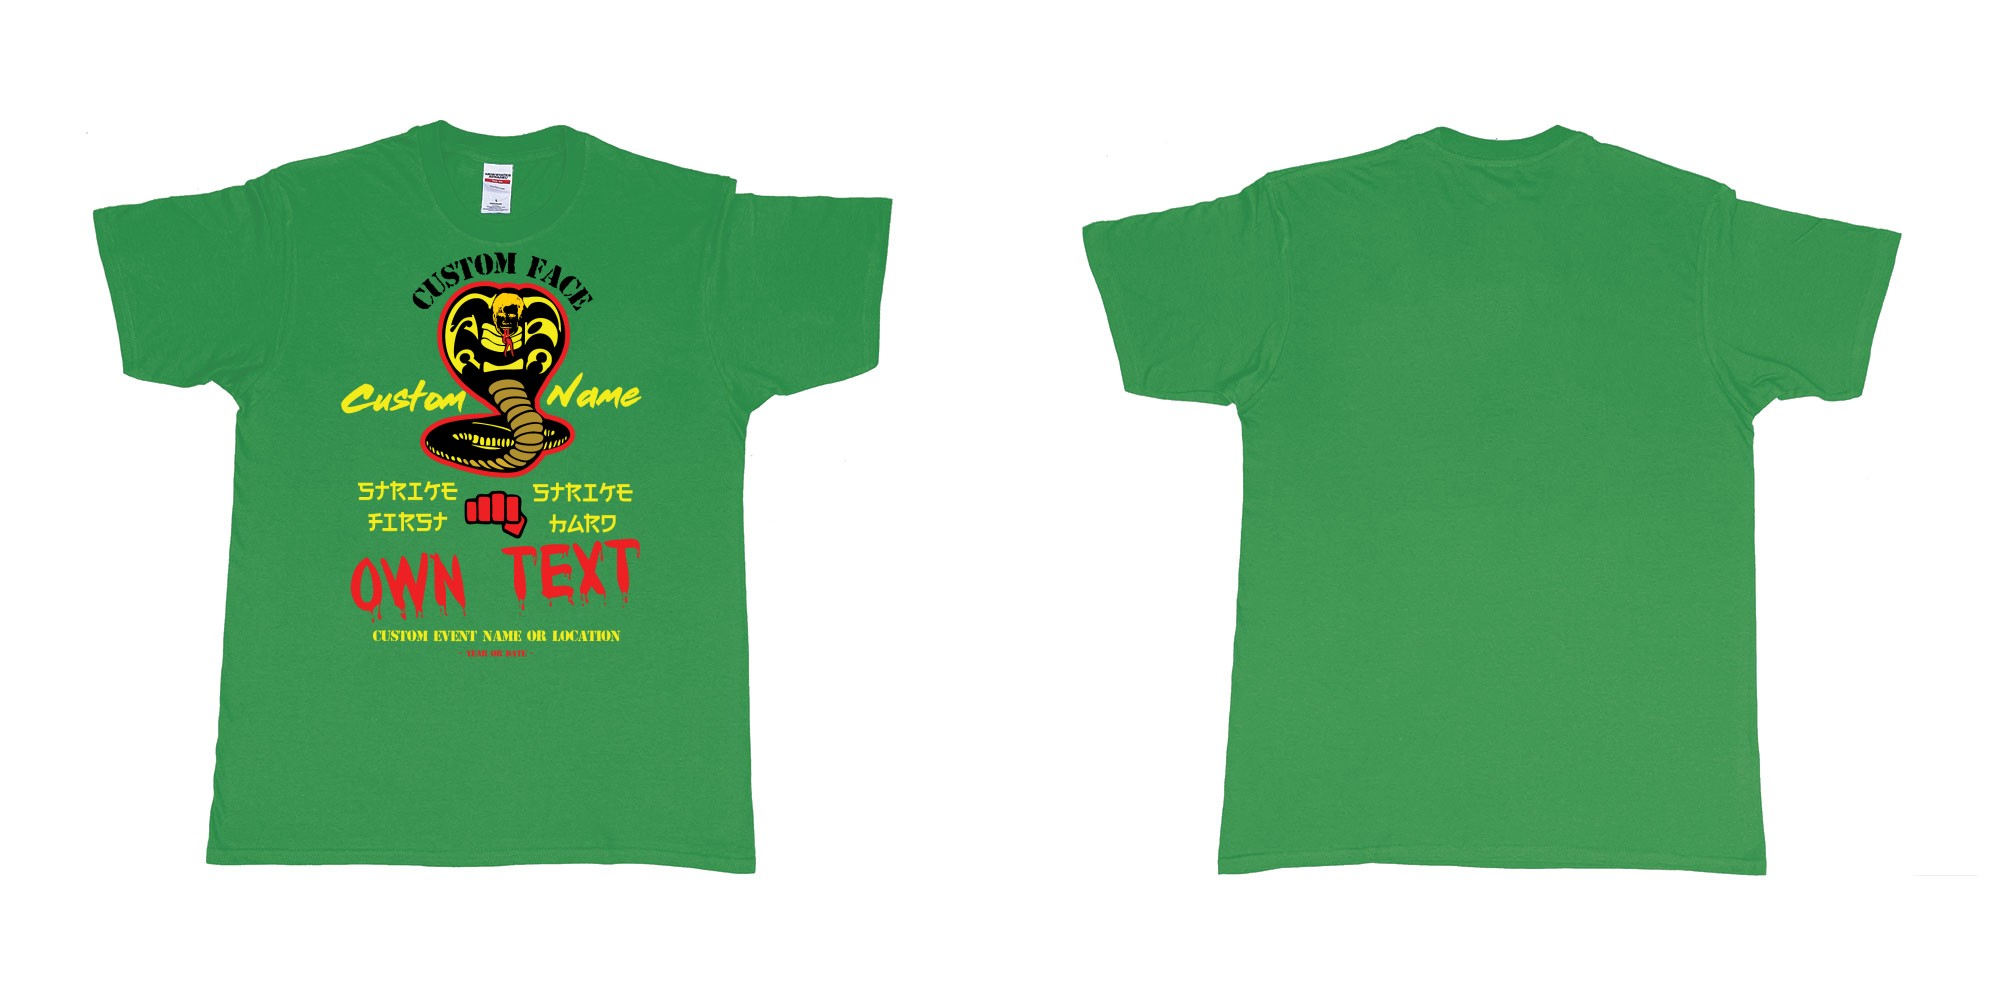 Custom tshirt design cobra kai strike first strike hard no mercy custom text in fabric color irish-green choice your own text made in Bali by The Pirate Way